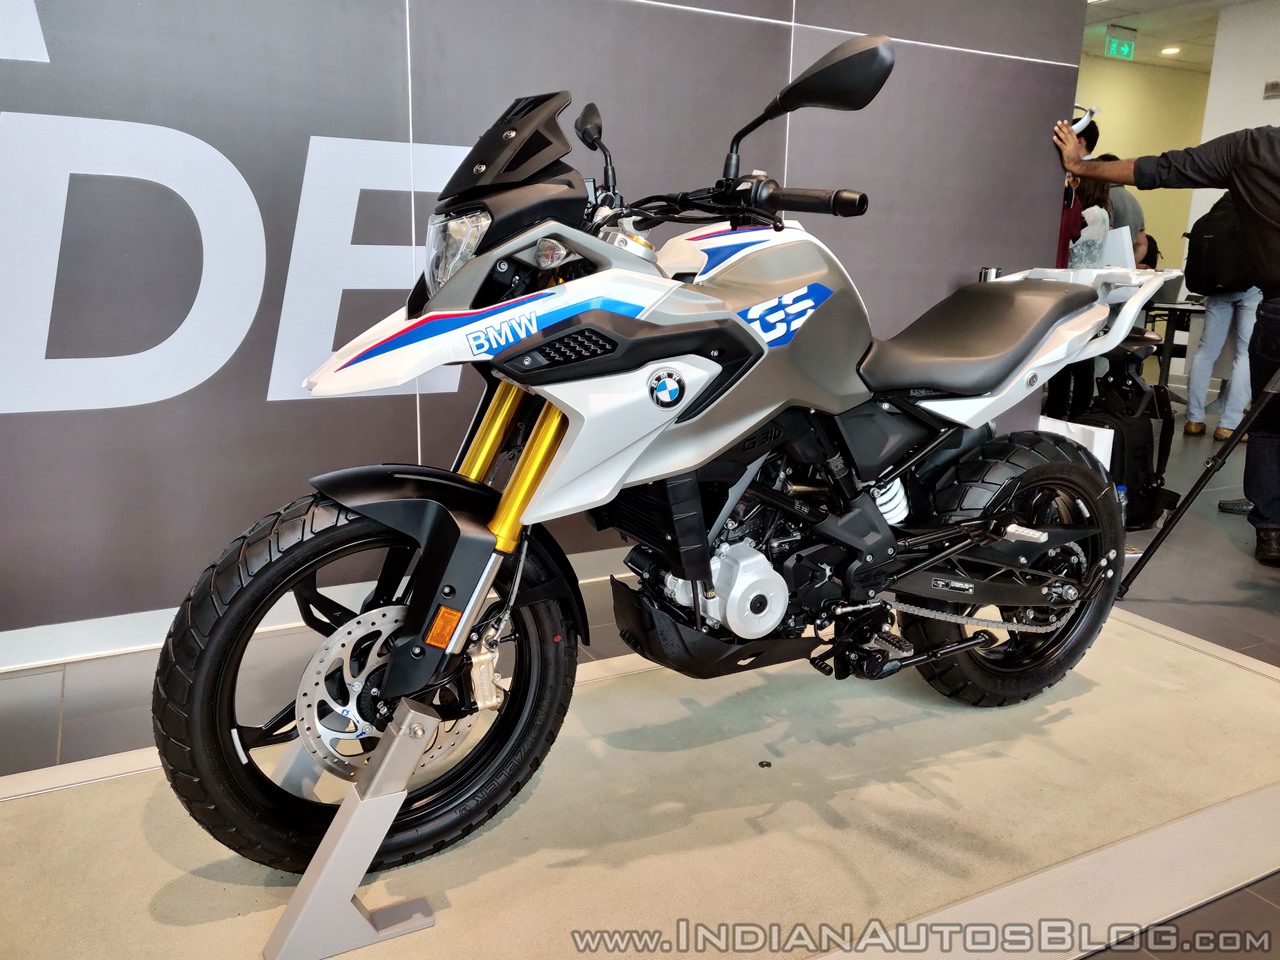 Bmw G 310 R And G 310 Gs Recalled In The Us Over Potential Brake Calliper Issue